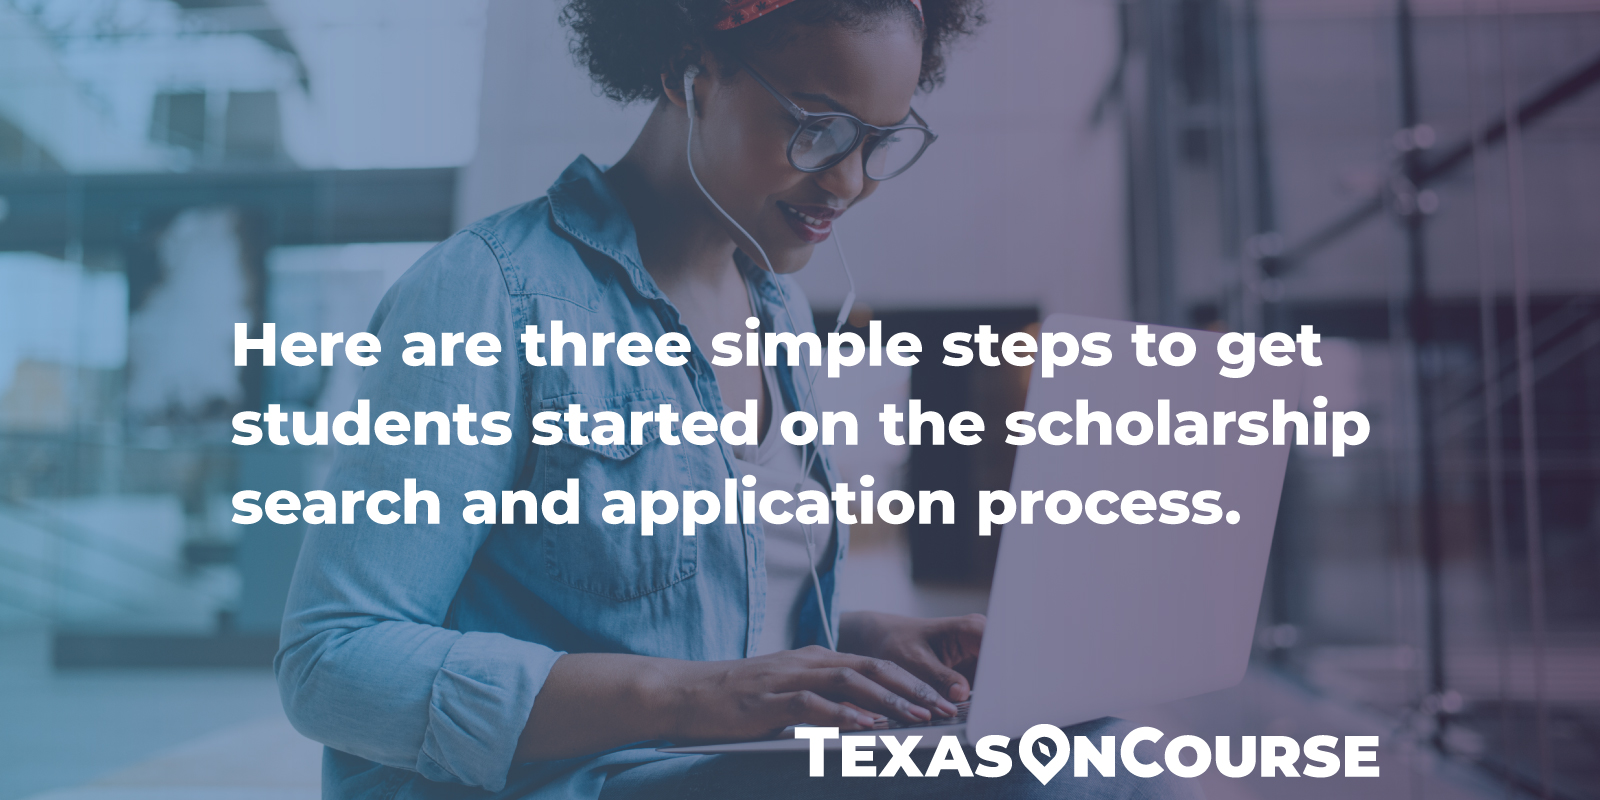 There are three simple steps to getting students started on the scholarship search and application process.